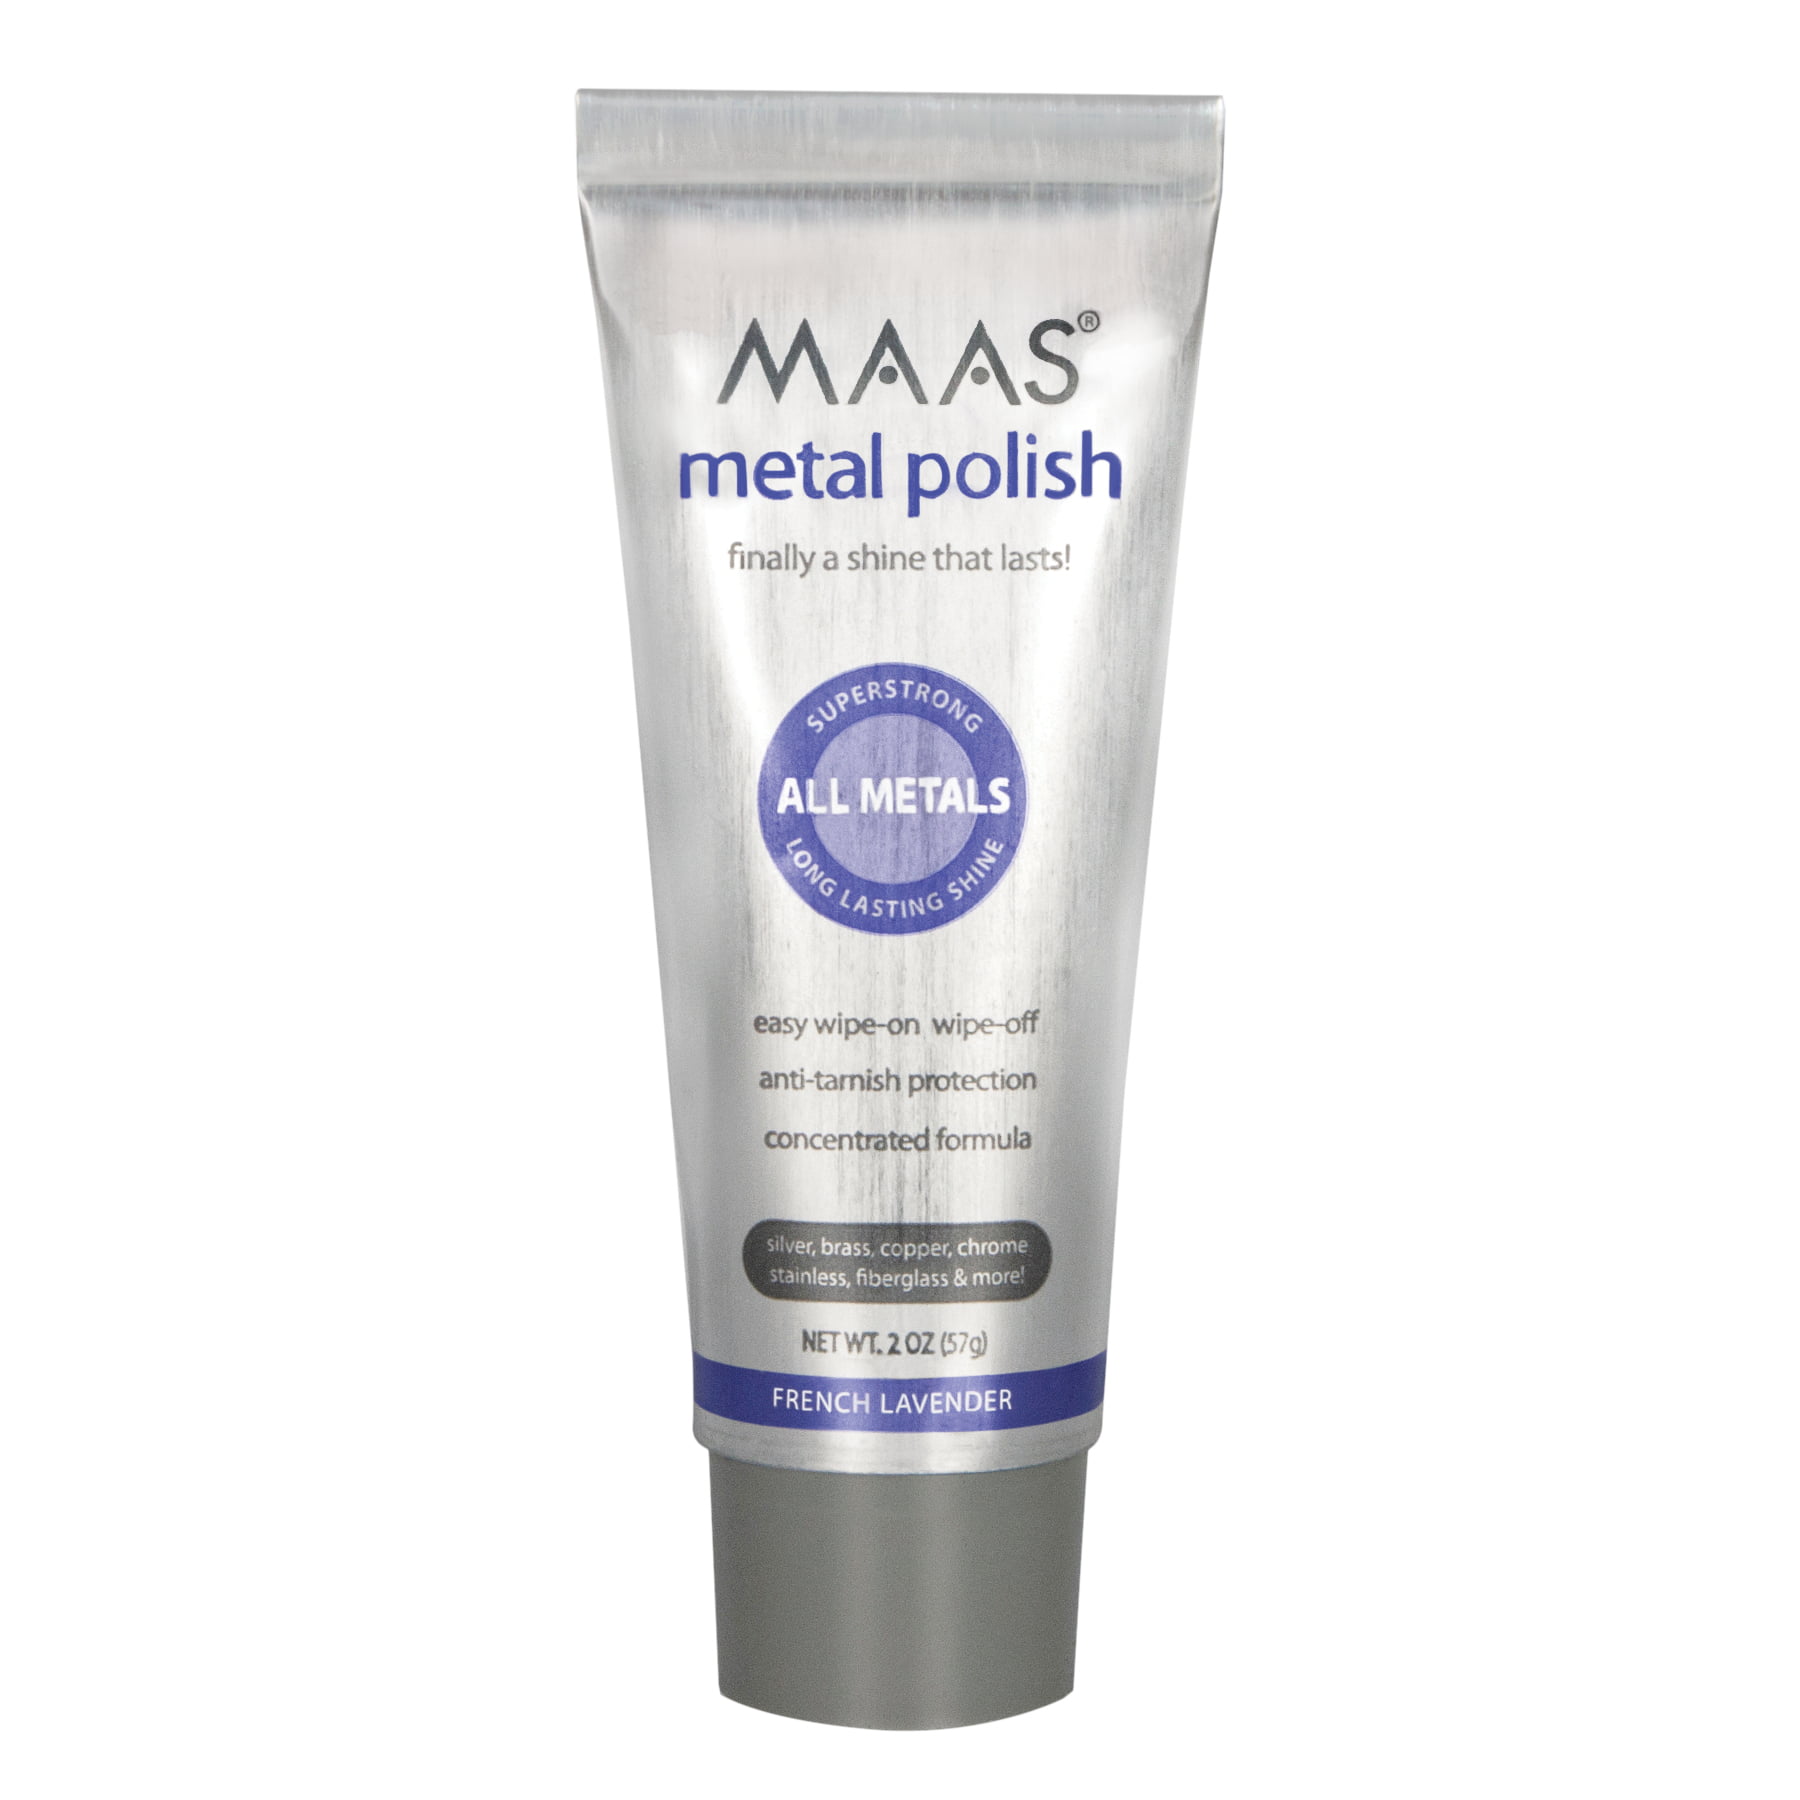 Maas Metal Polishing Creme for All Metals, French Lavender 2 Oz - 91403 for  sale online